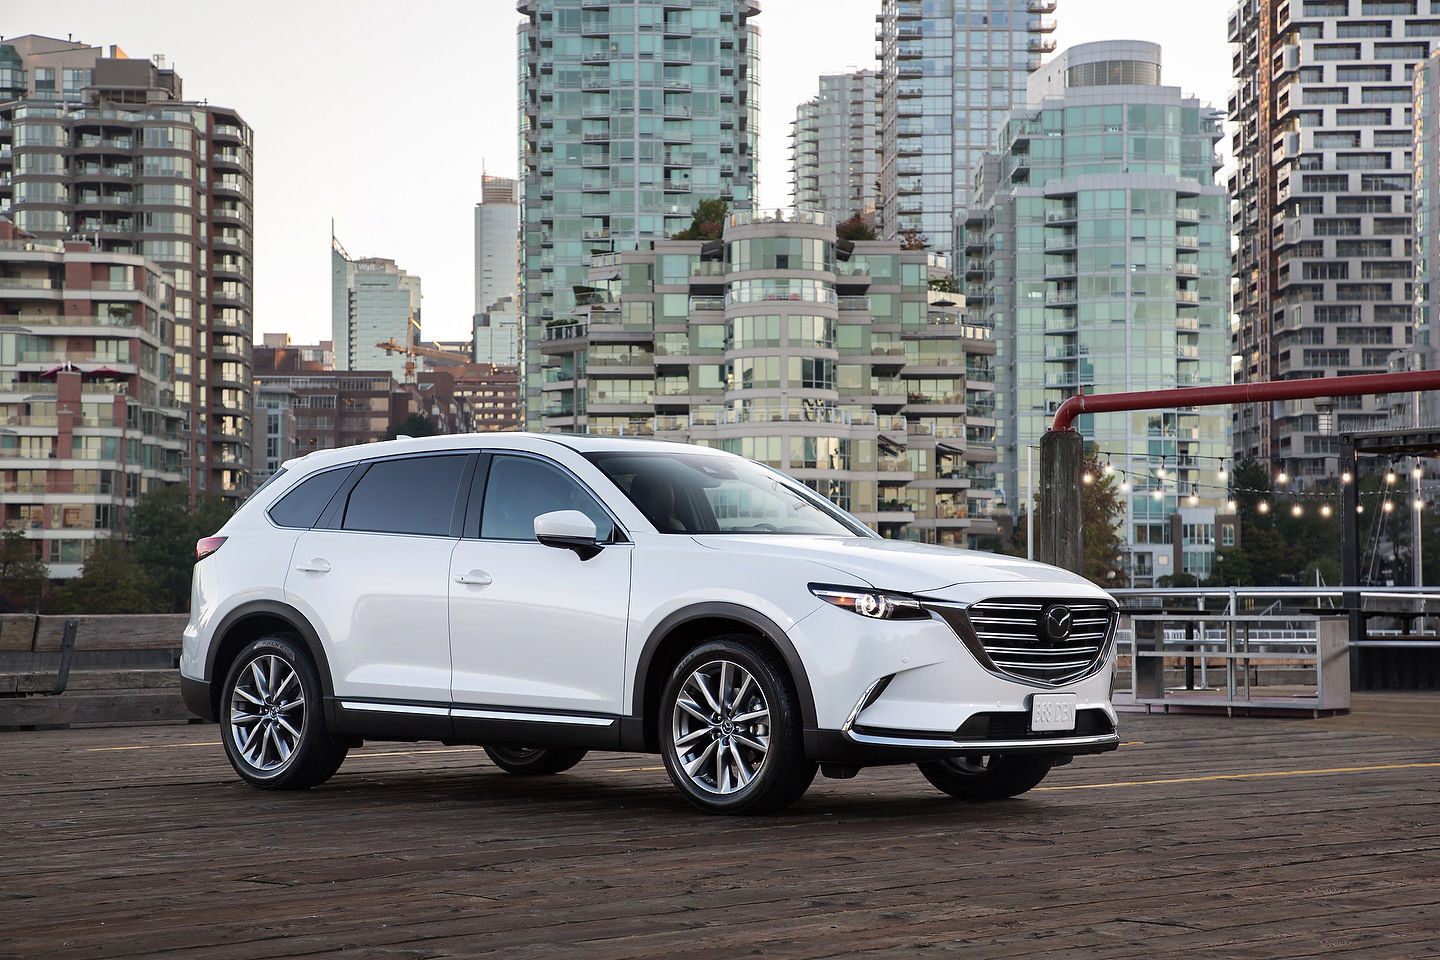 Here Is the New 2019 Mazda CX-9